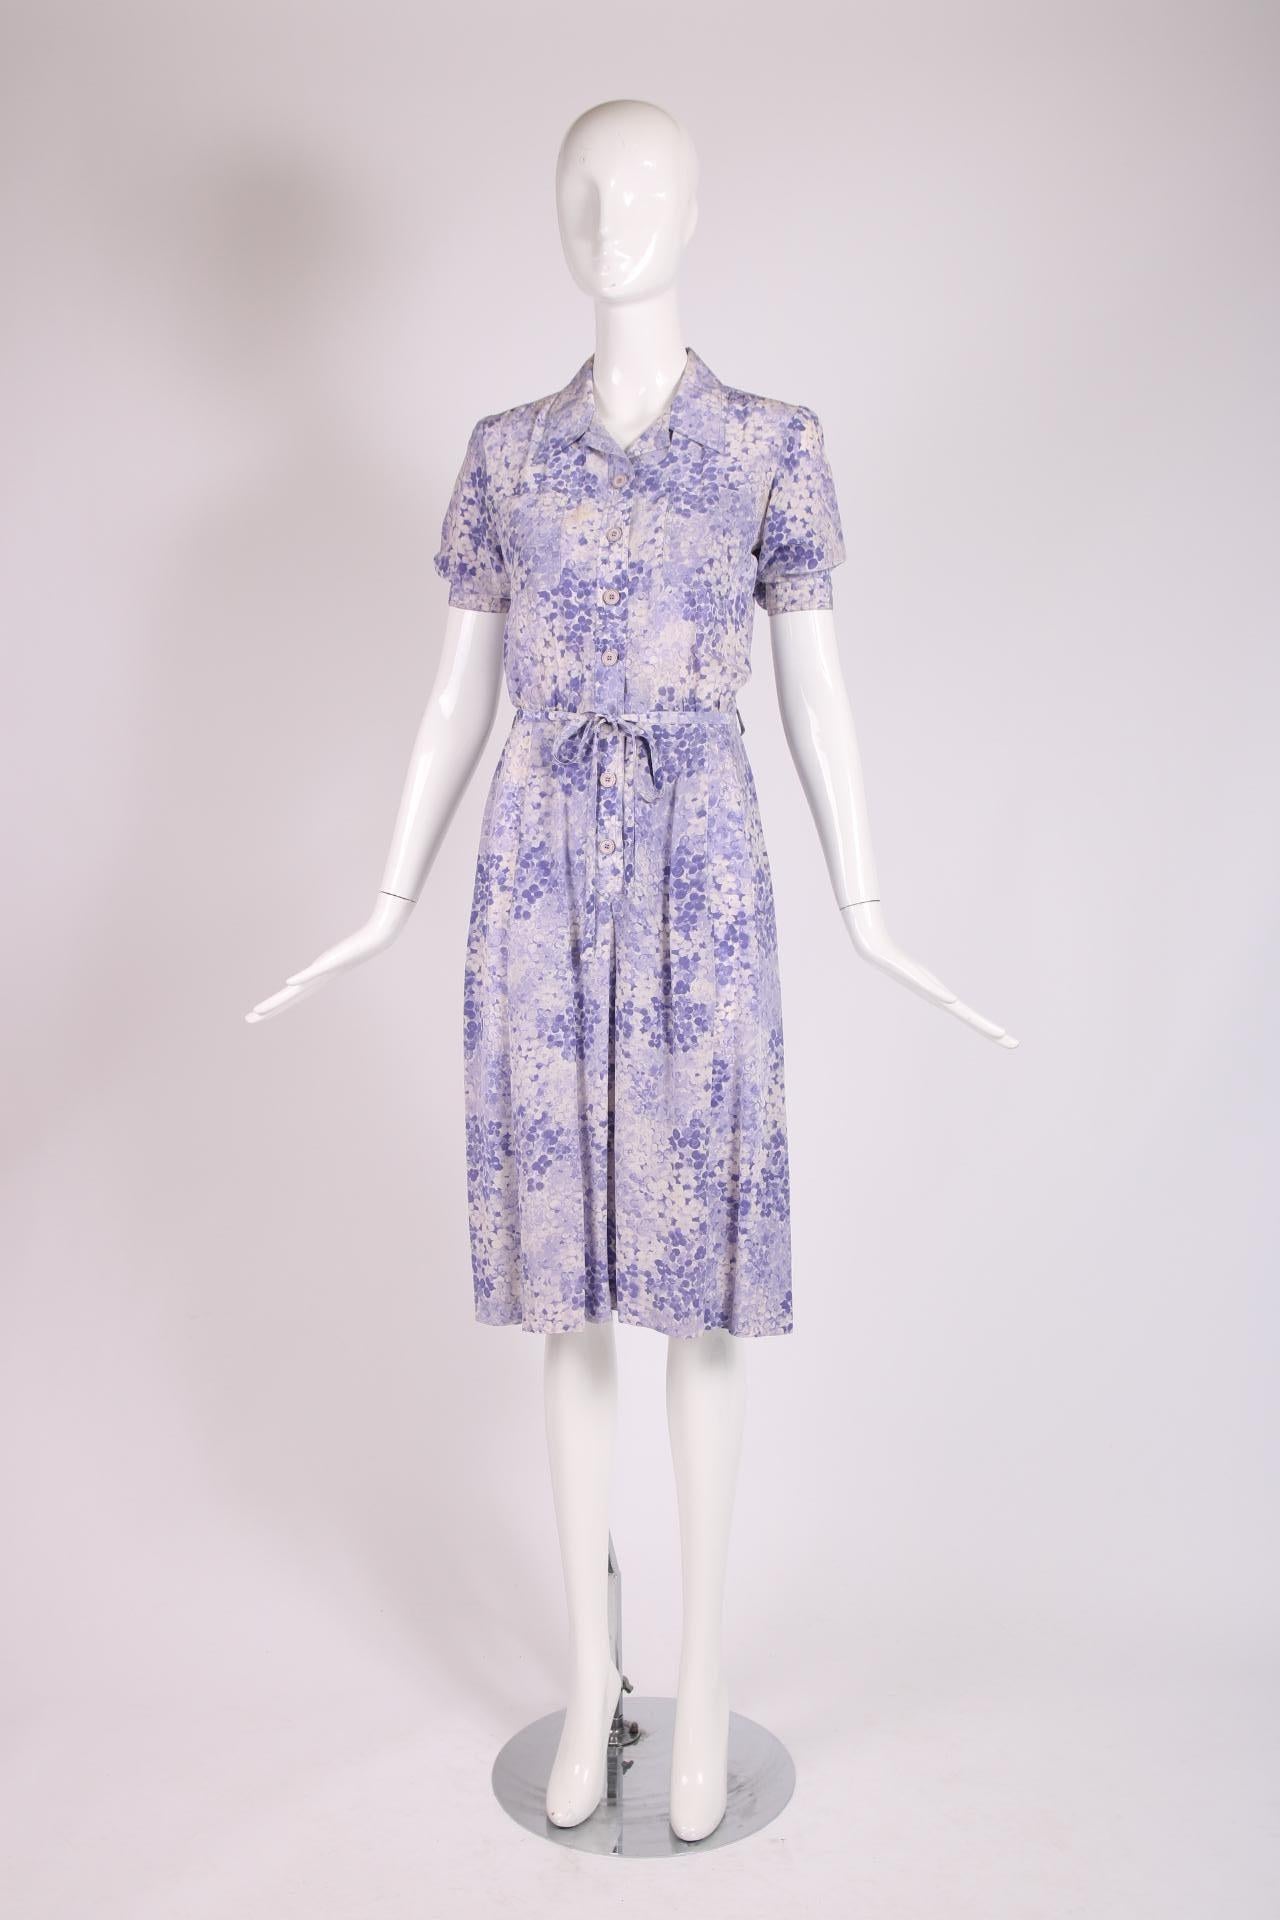 1970's Yves Saint Laurent purple floral print day dress with short sleeves, button closures down center front, frontal patch pockets, a self belt and a drop pleated skirt. 100% silk, in excellent condition. Size tag 40 but fits more like a modern